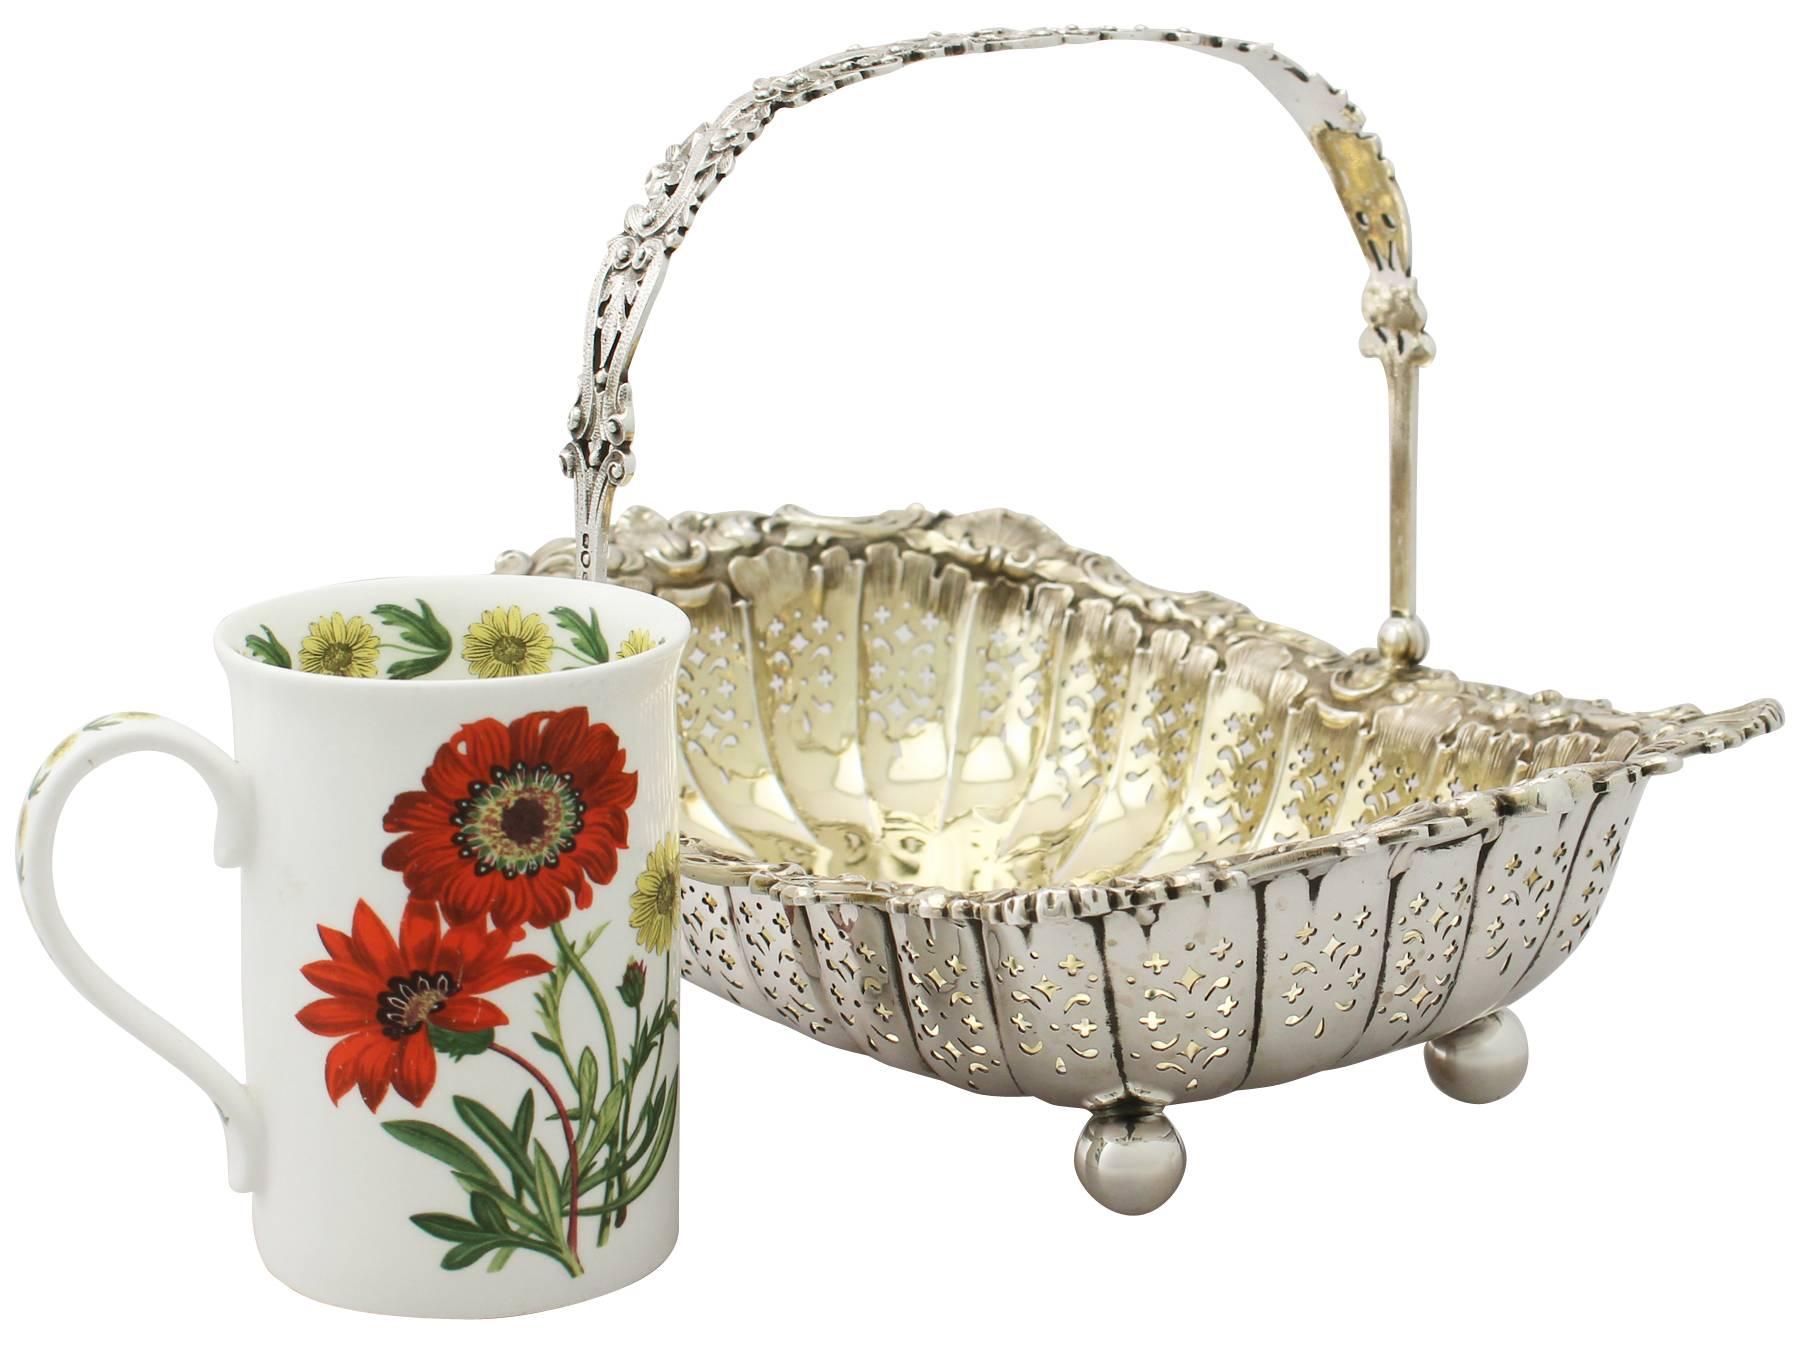 A fine and impressive antique Victorian English sterling silver swing handled basket by James Dixon & Sons Ltd; part of our ornamental silverware collection.

This antique Victorian sterling silver basket has a rectangular rounded form onto four